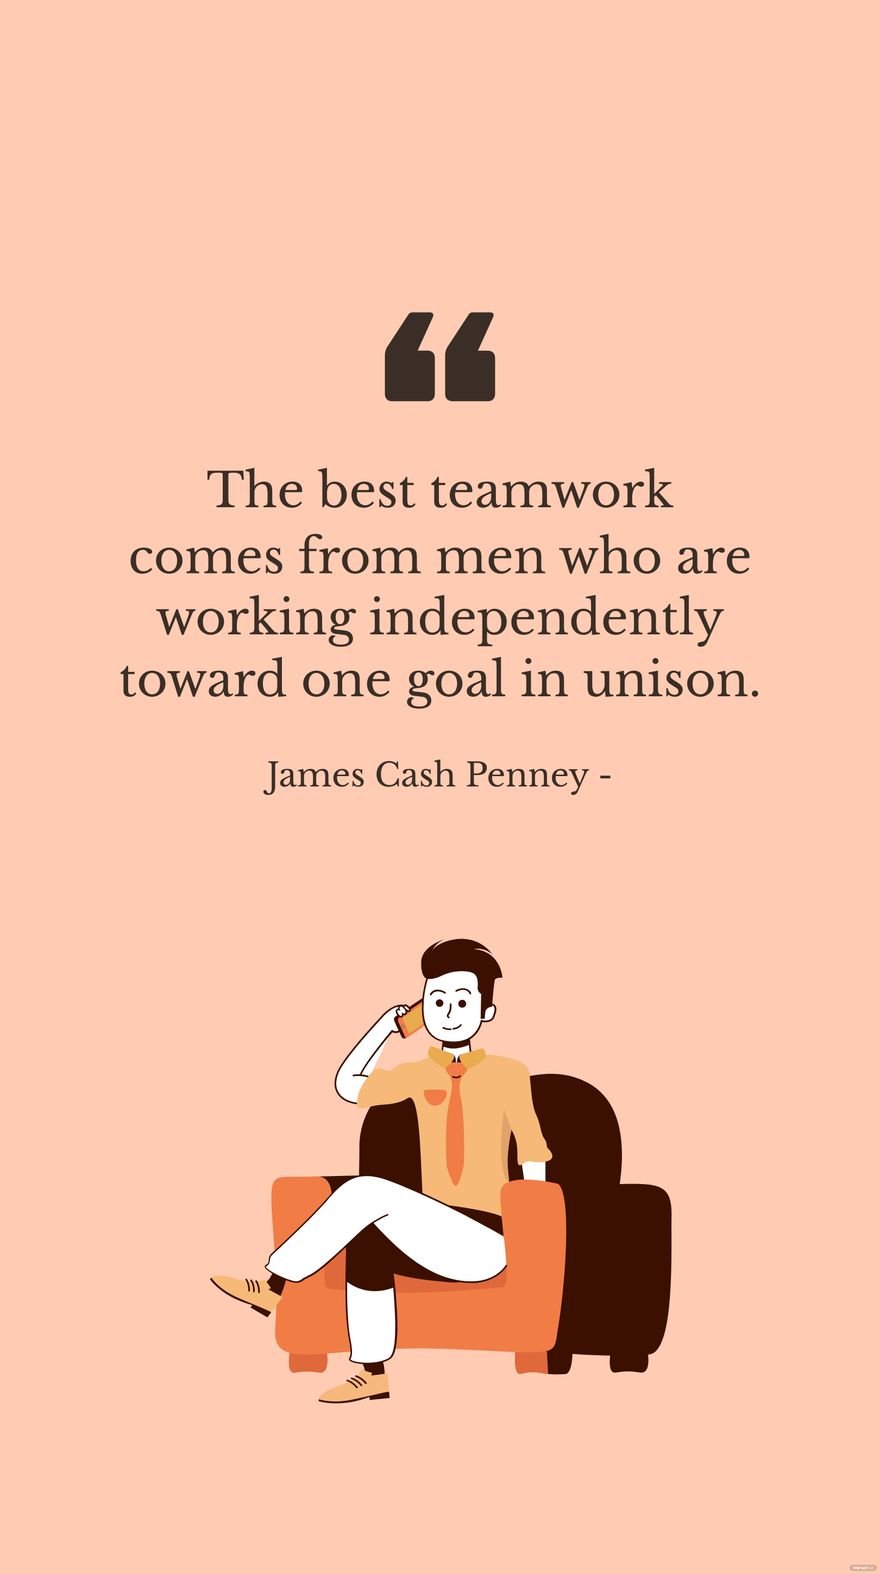 James Cash Penney - The best teamwork comes from men who are working independently toward one goal in unison. in JPG